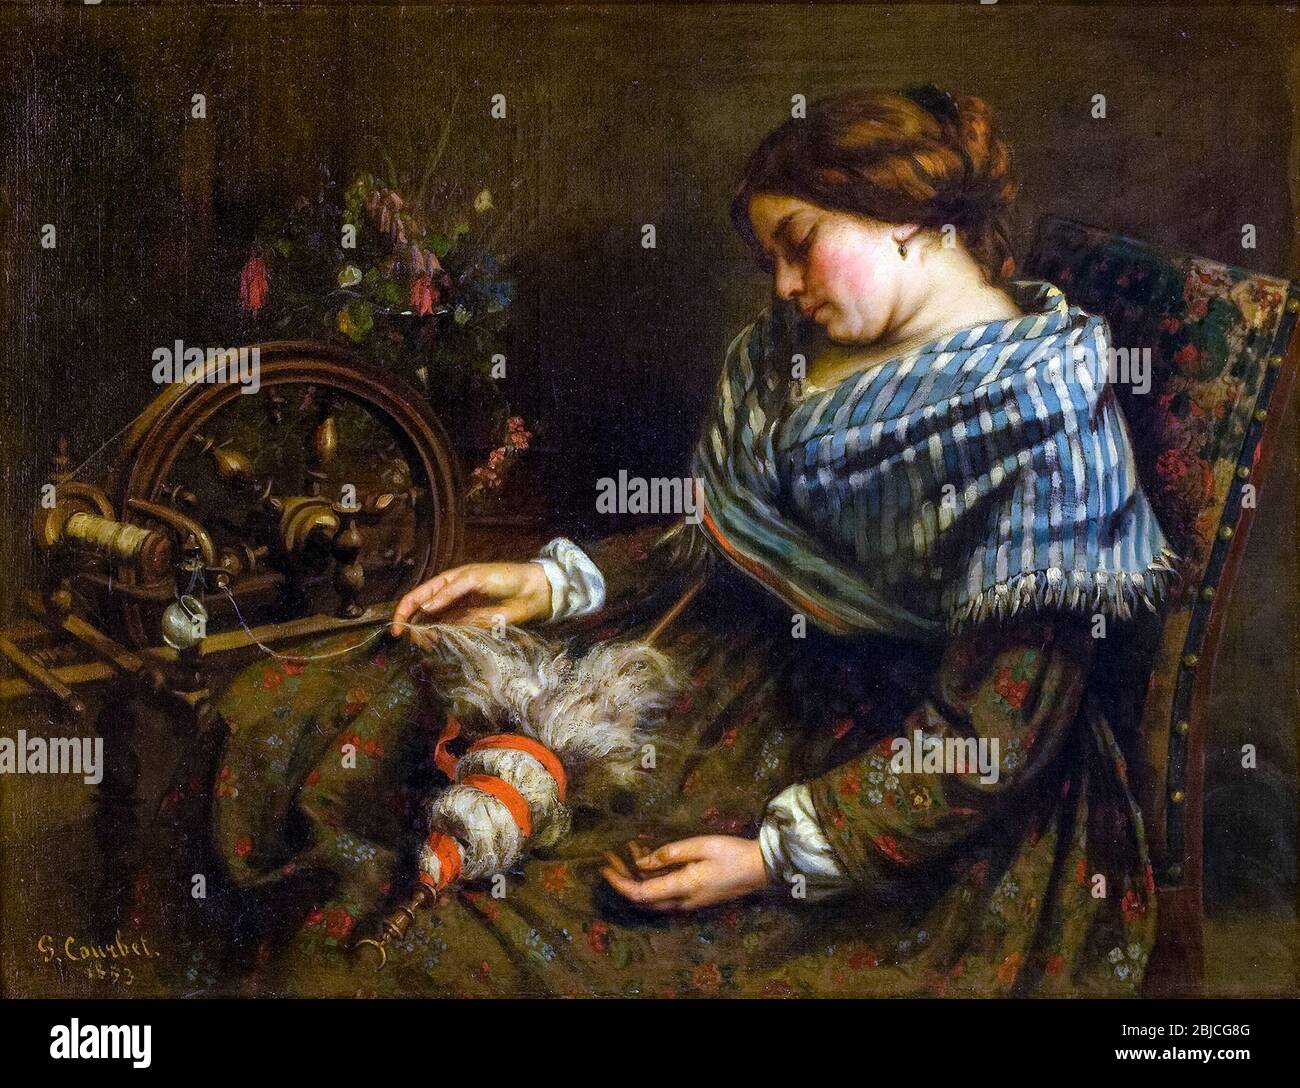 Gustave Courbet, The Sleeping Spinner, painting, 1853 Stock Photo